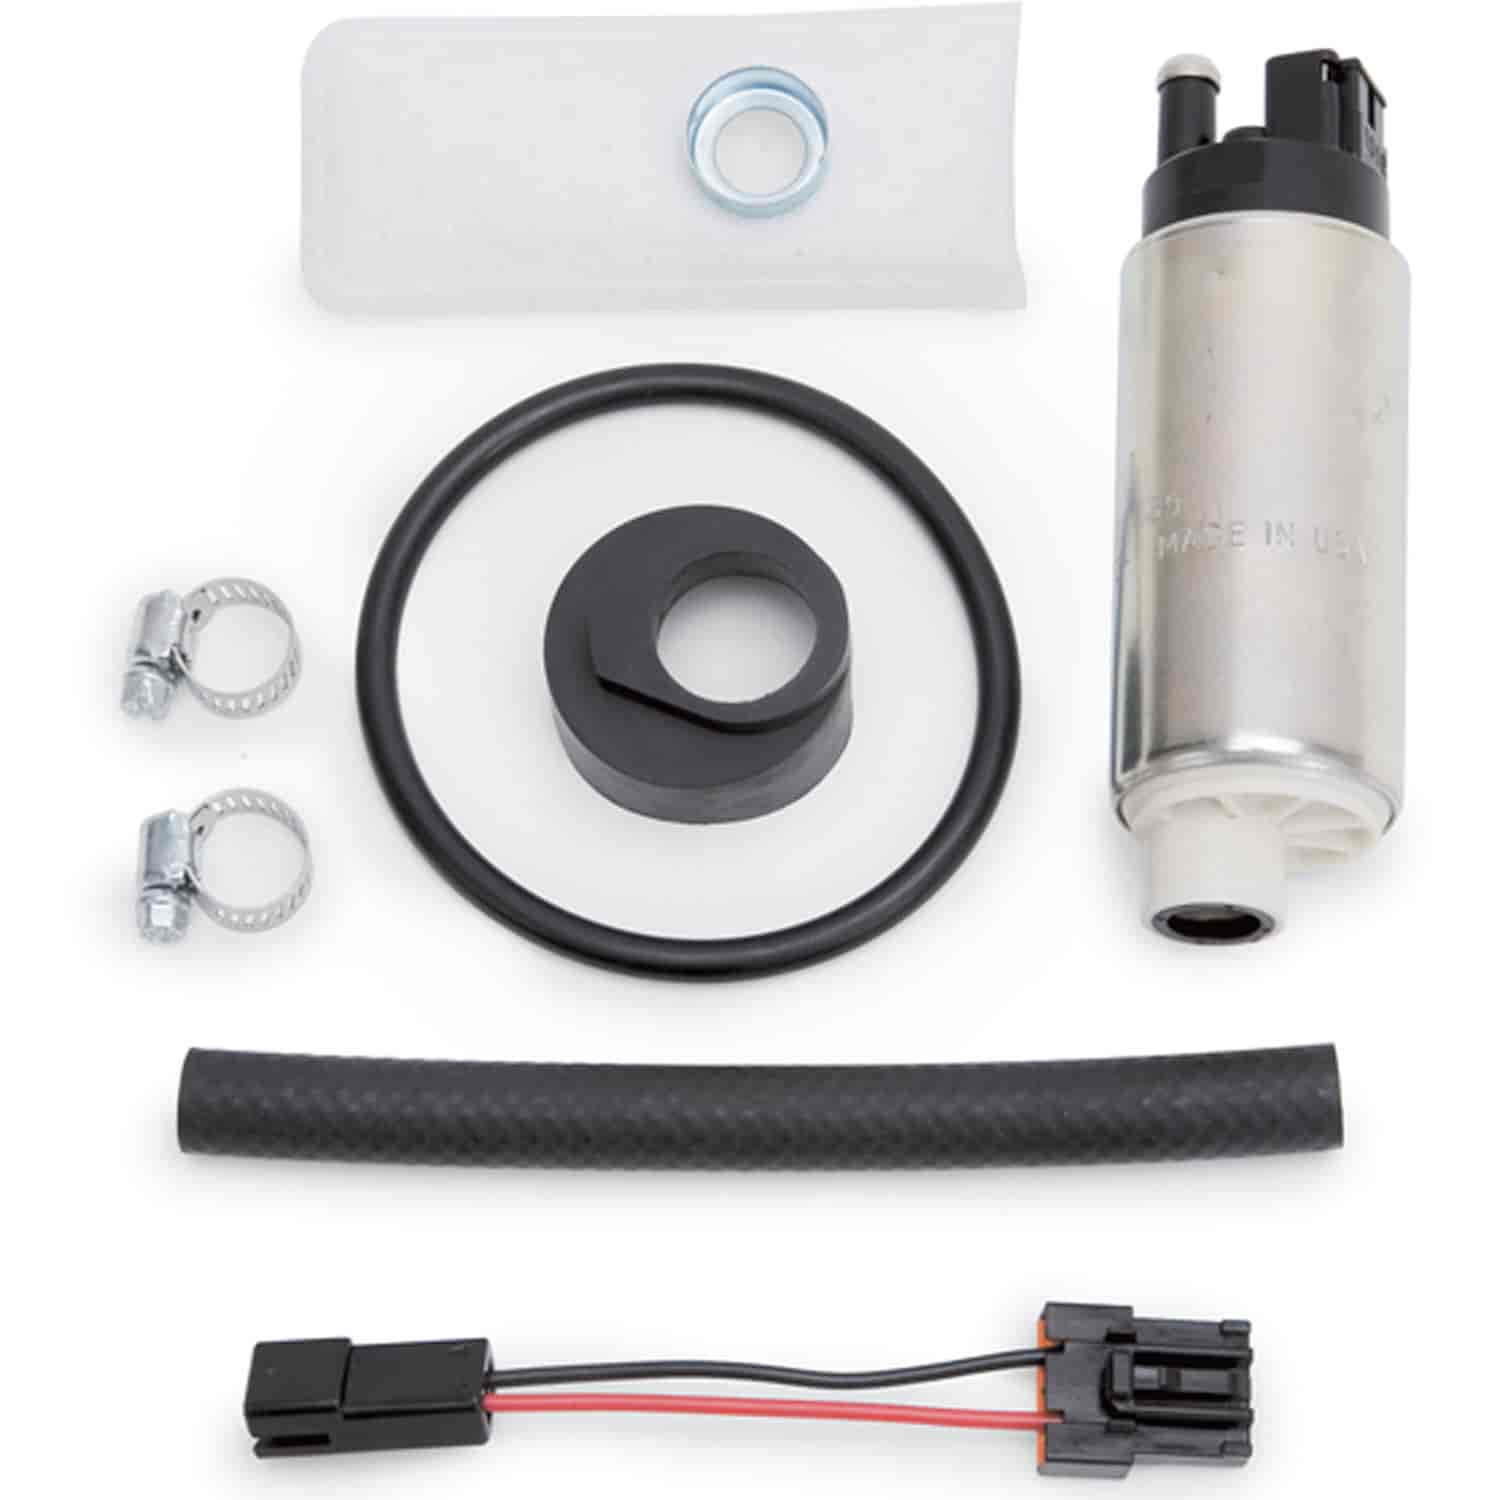 In-Tank Fuel Pump for GM Vehicles (Non-TBI) 255